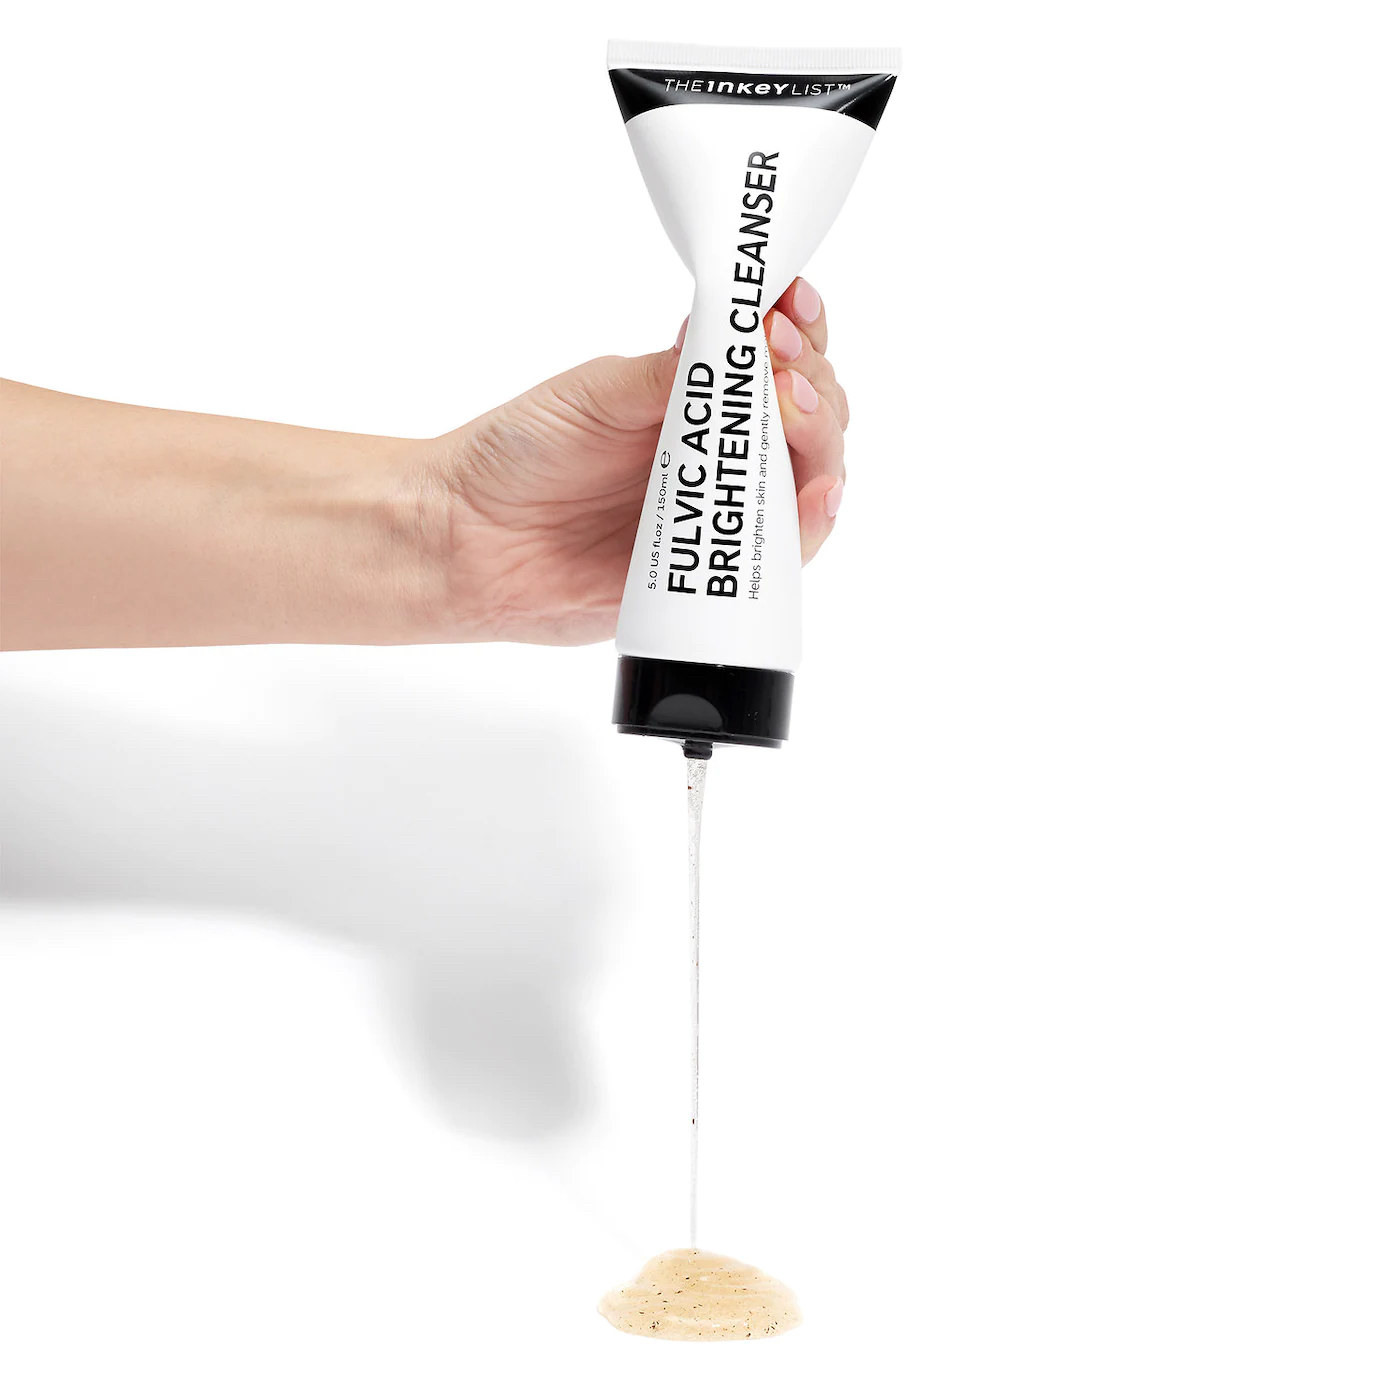 Hand squeezing out product from a tube of the fulvic acid cleanser